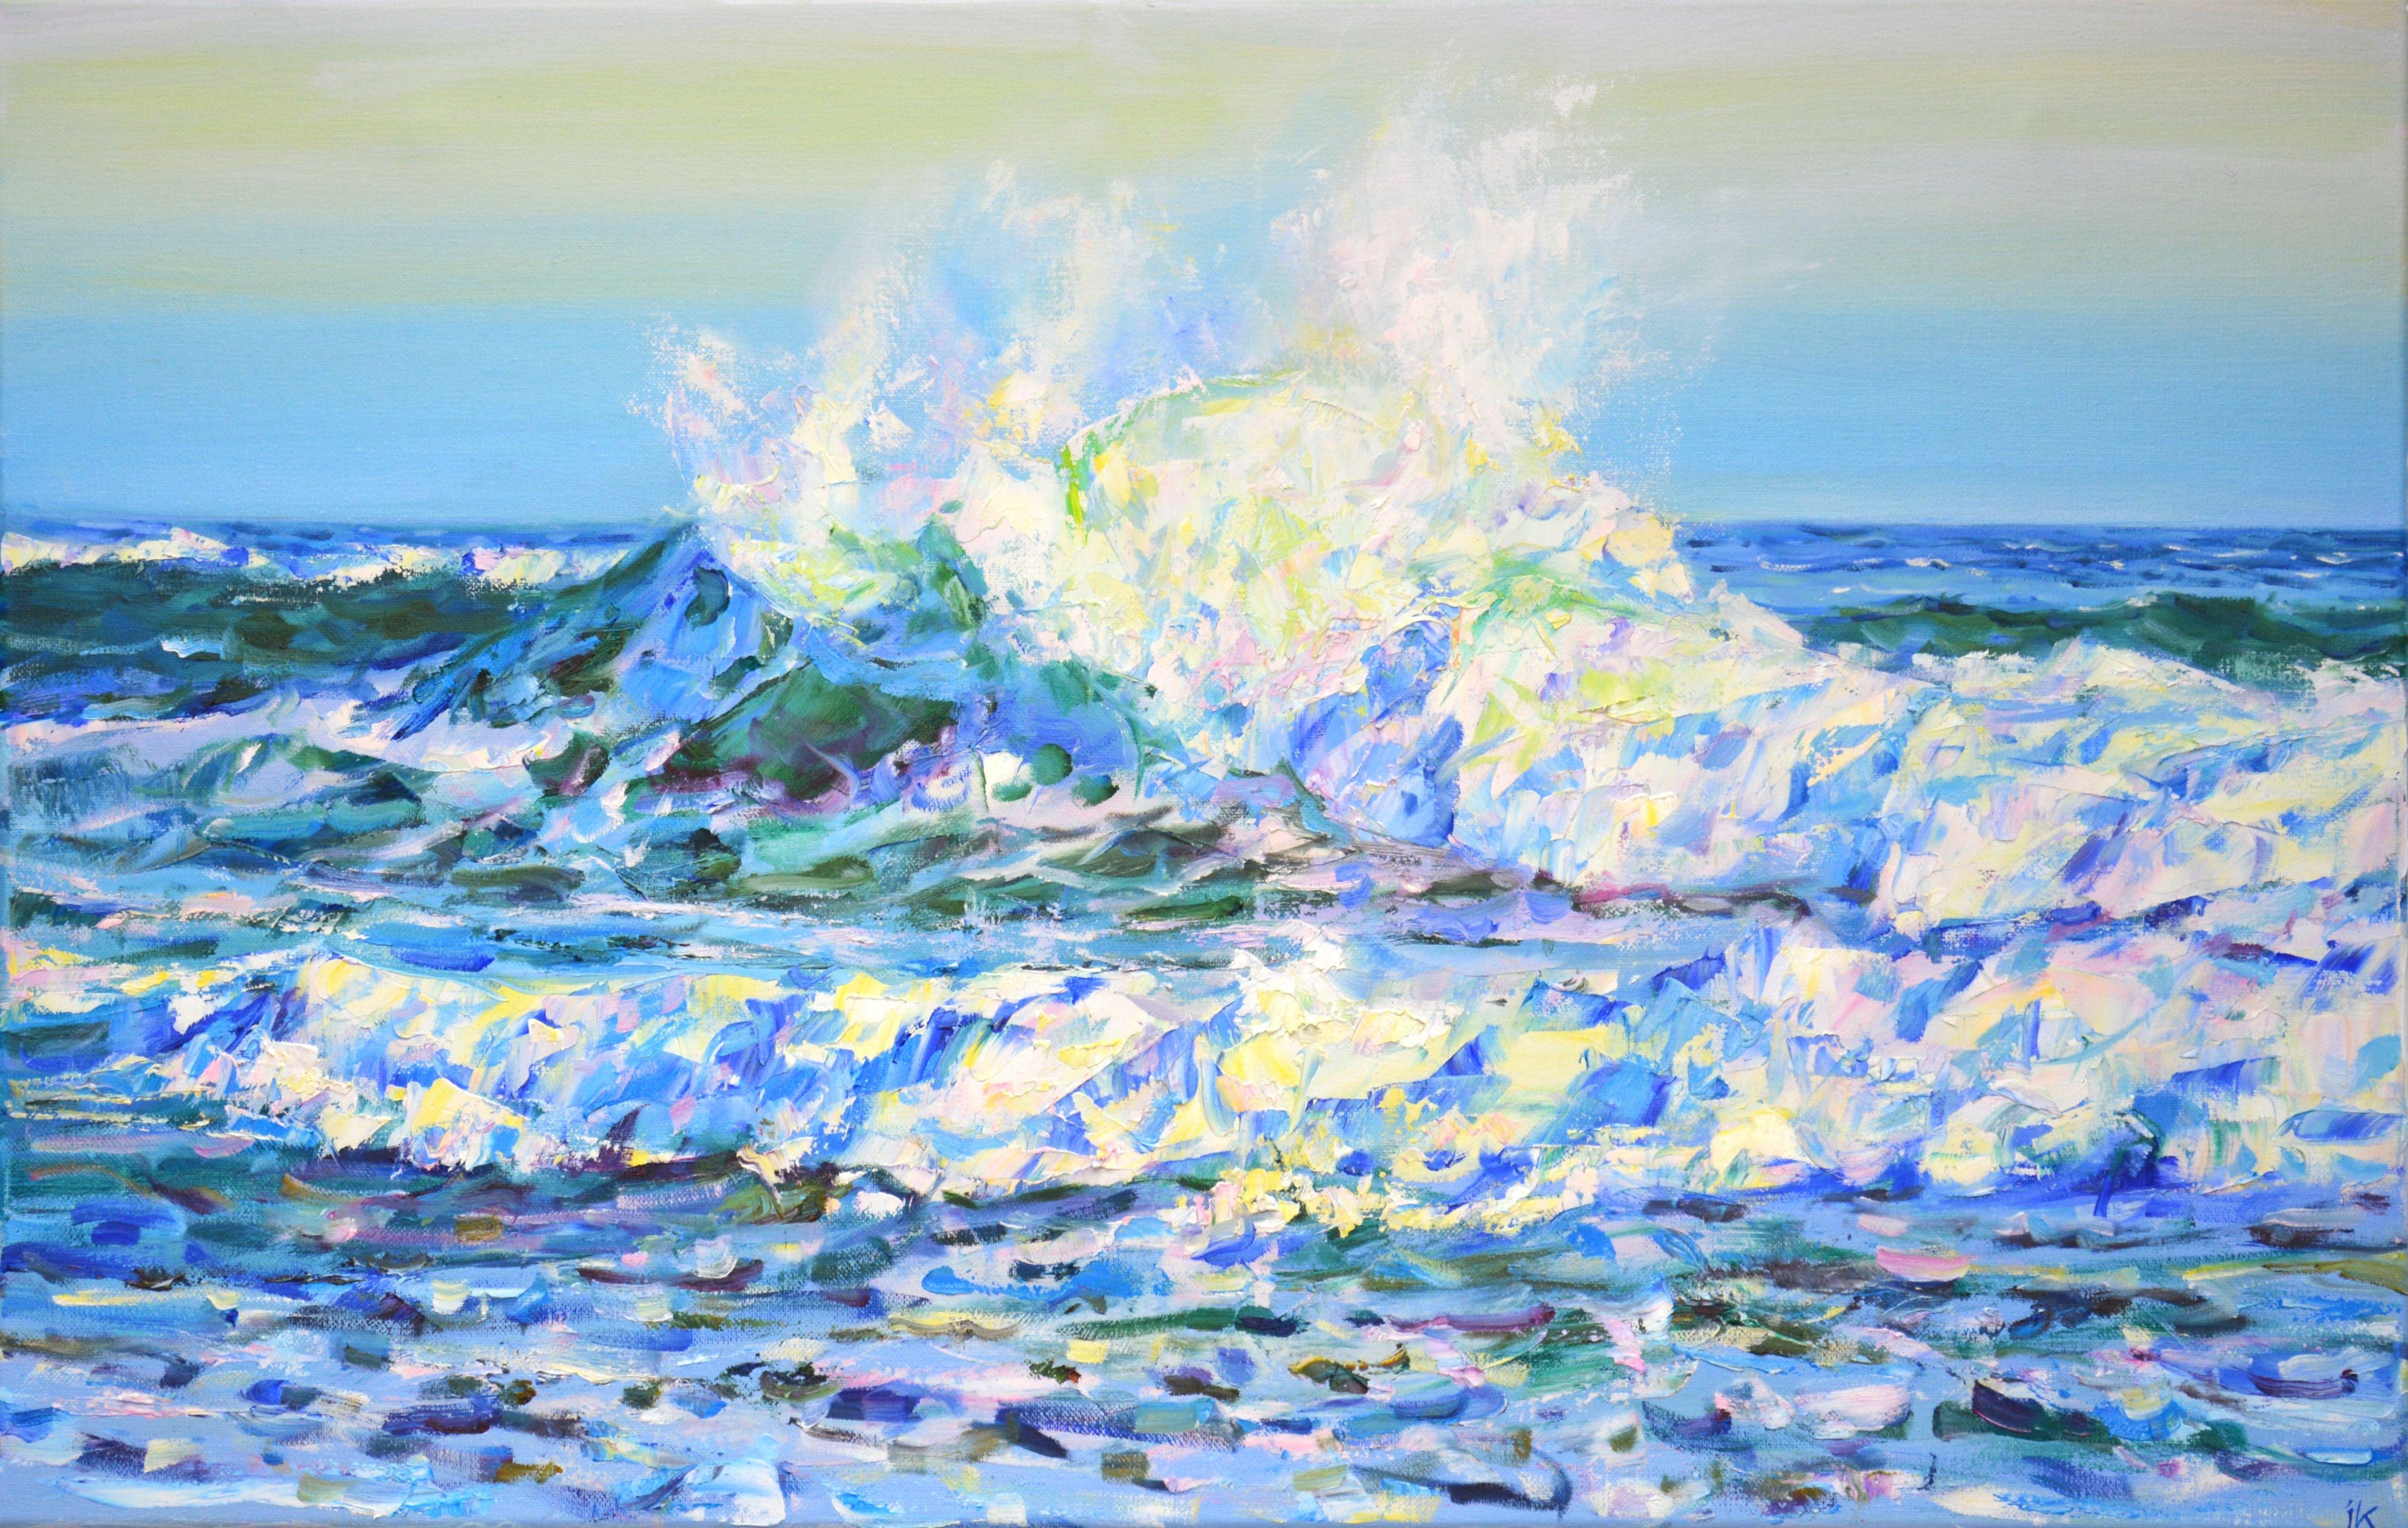 Ocean. Waves, wind. Author's, textured, original painting. Impressionism: A palette of knives and a rich blue, white palette highlight the energy of the ocean. Part of a permanent series of seascapes. The picture is of good quality, the colors make